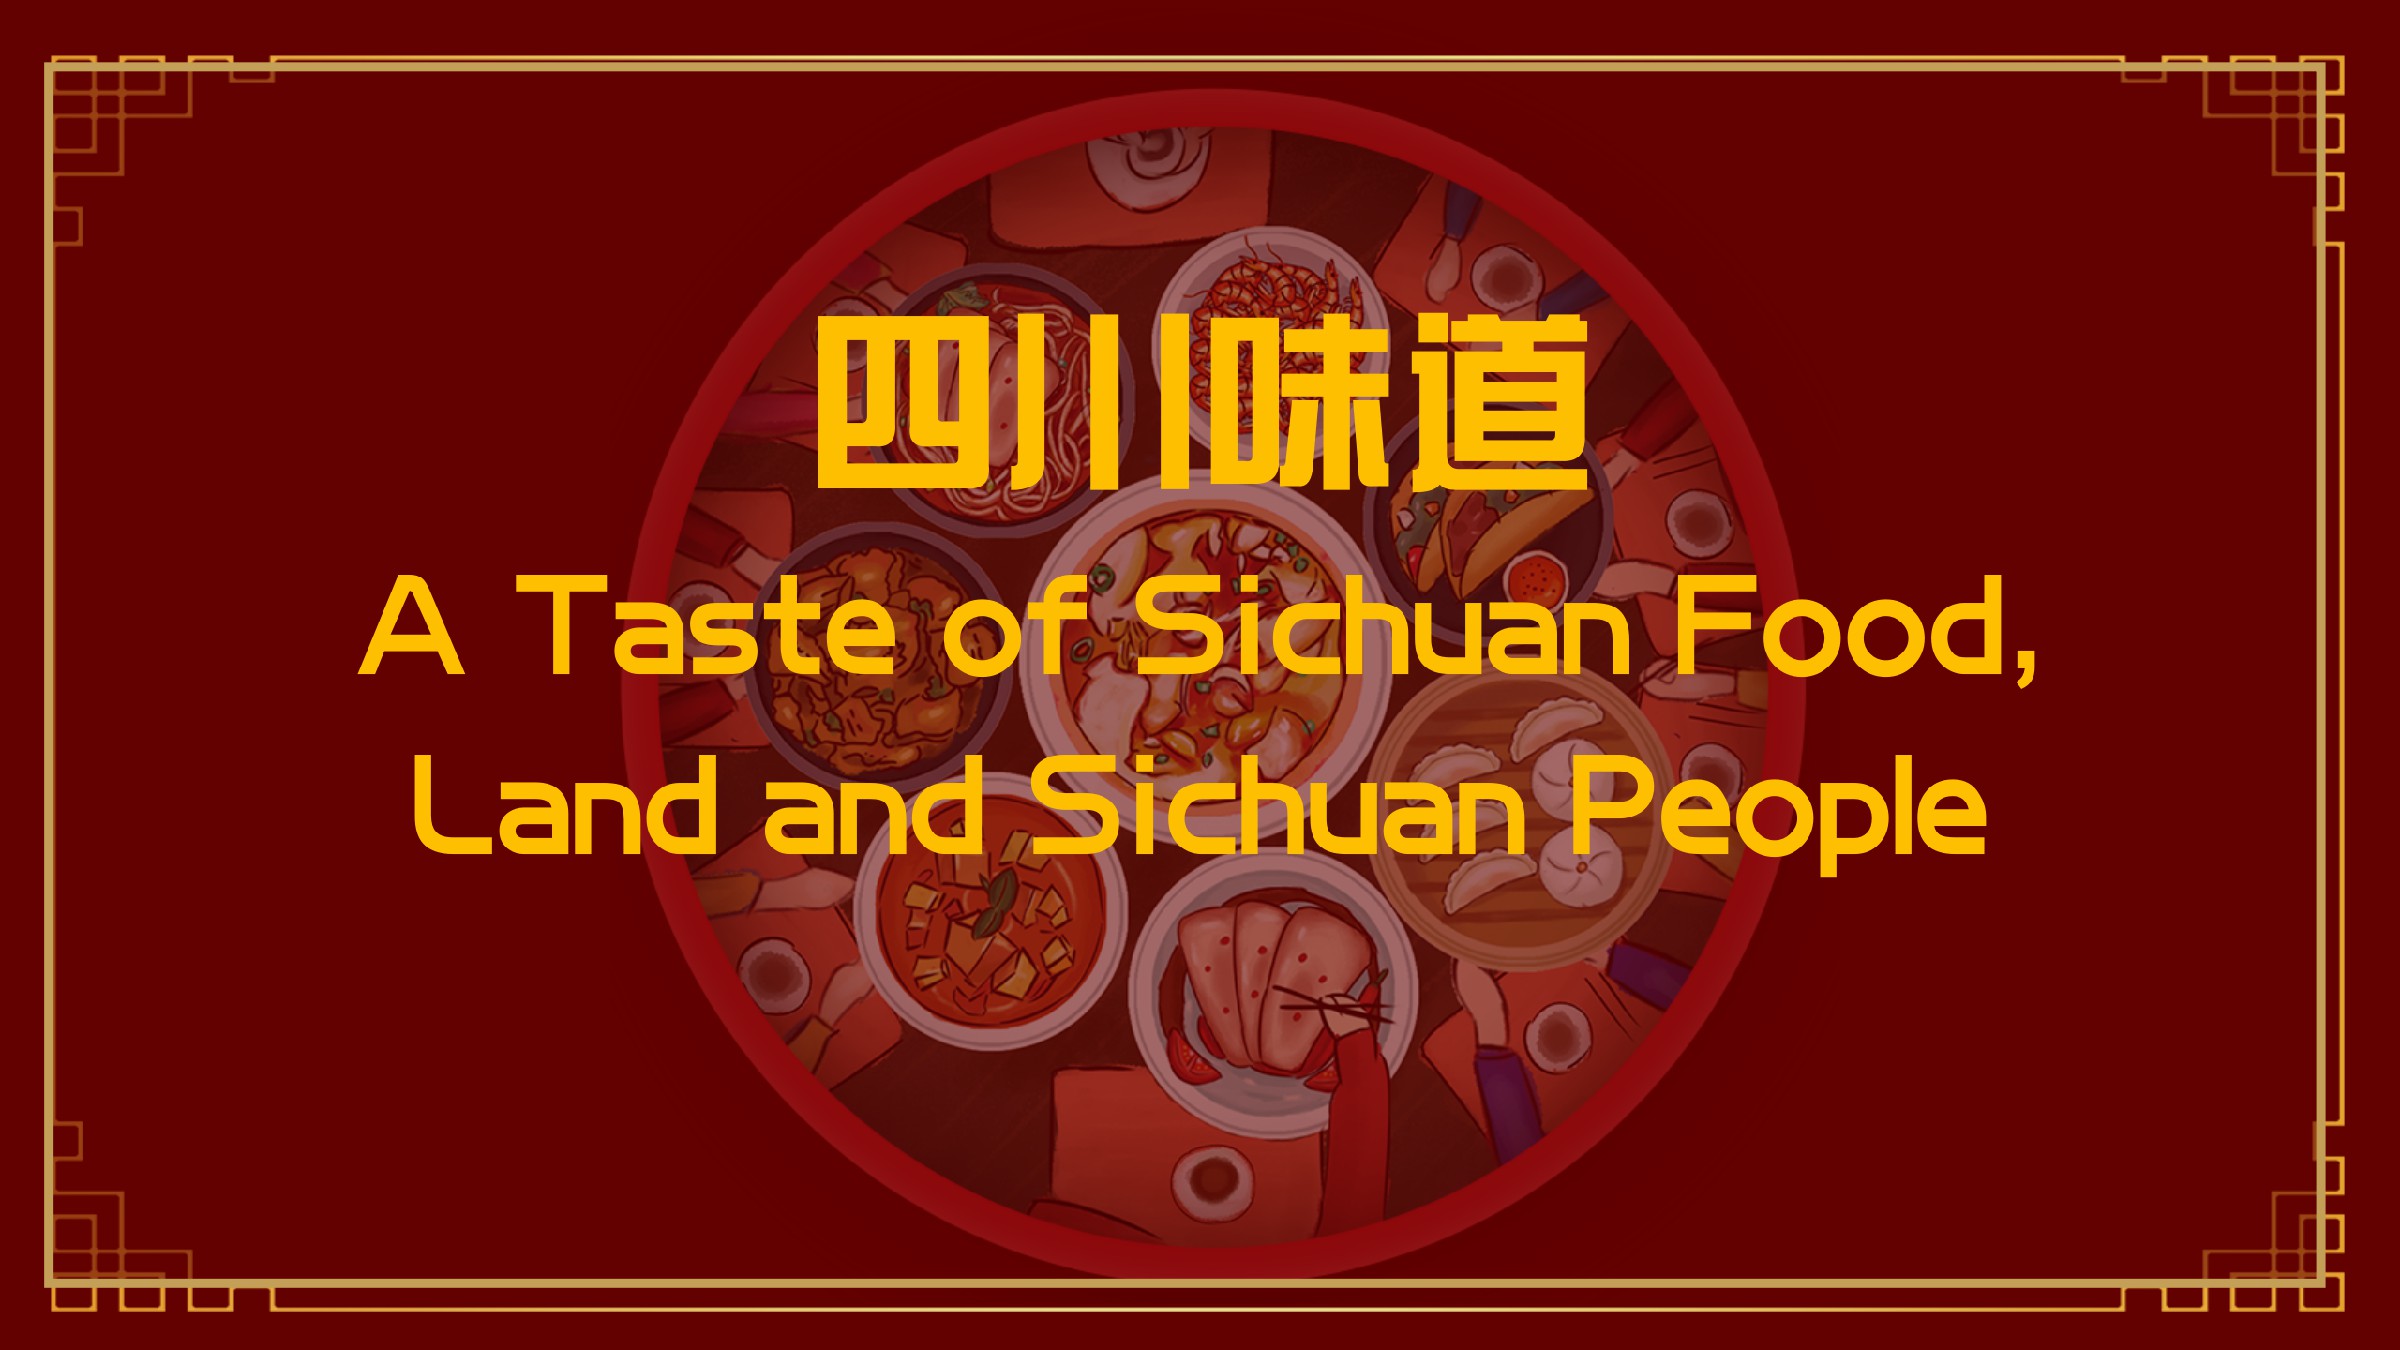 A Taste of Sichuan Food, Land and Sichuan People